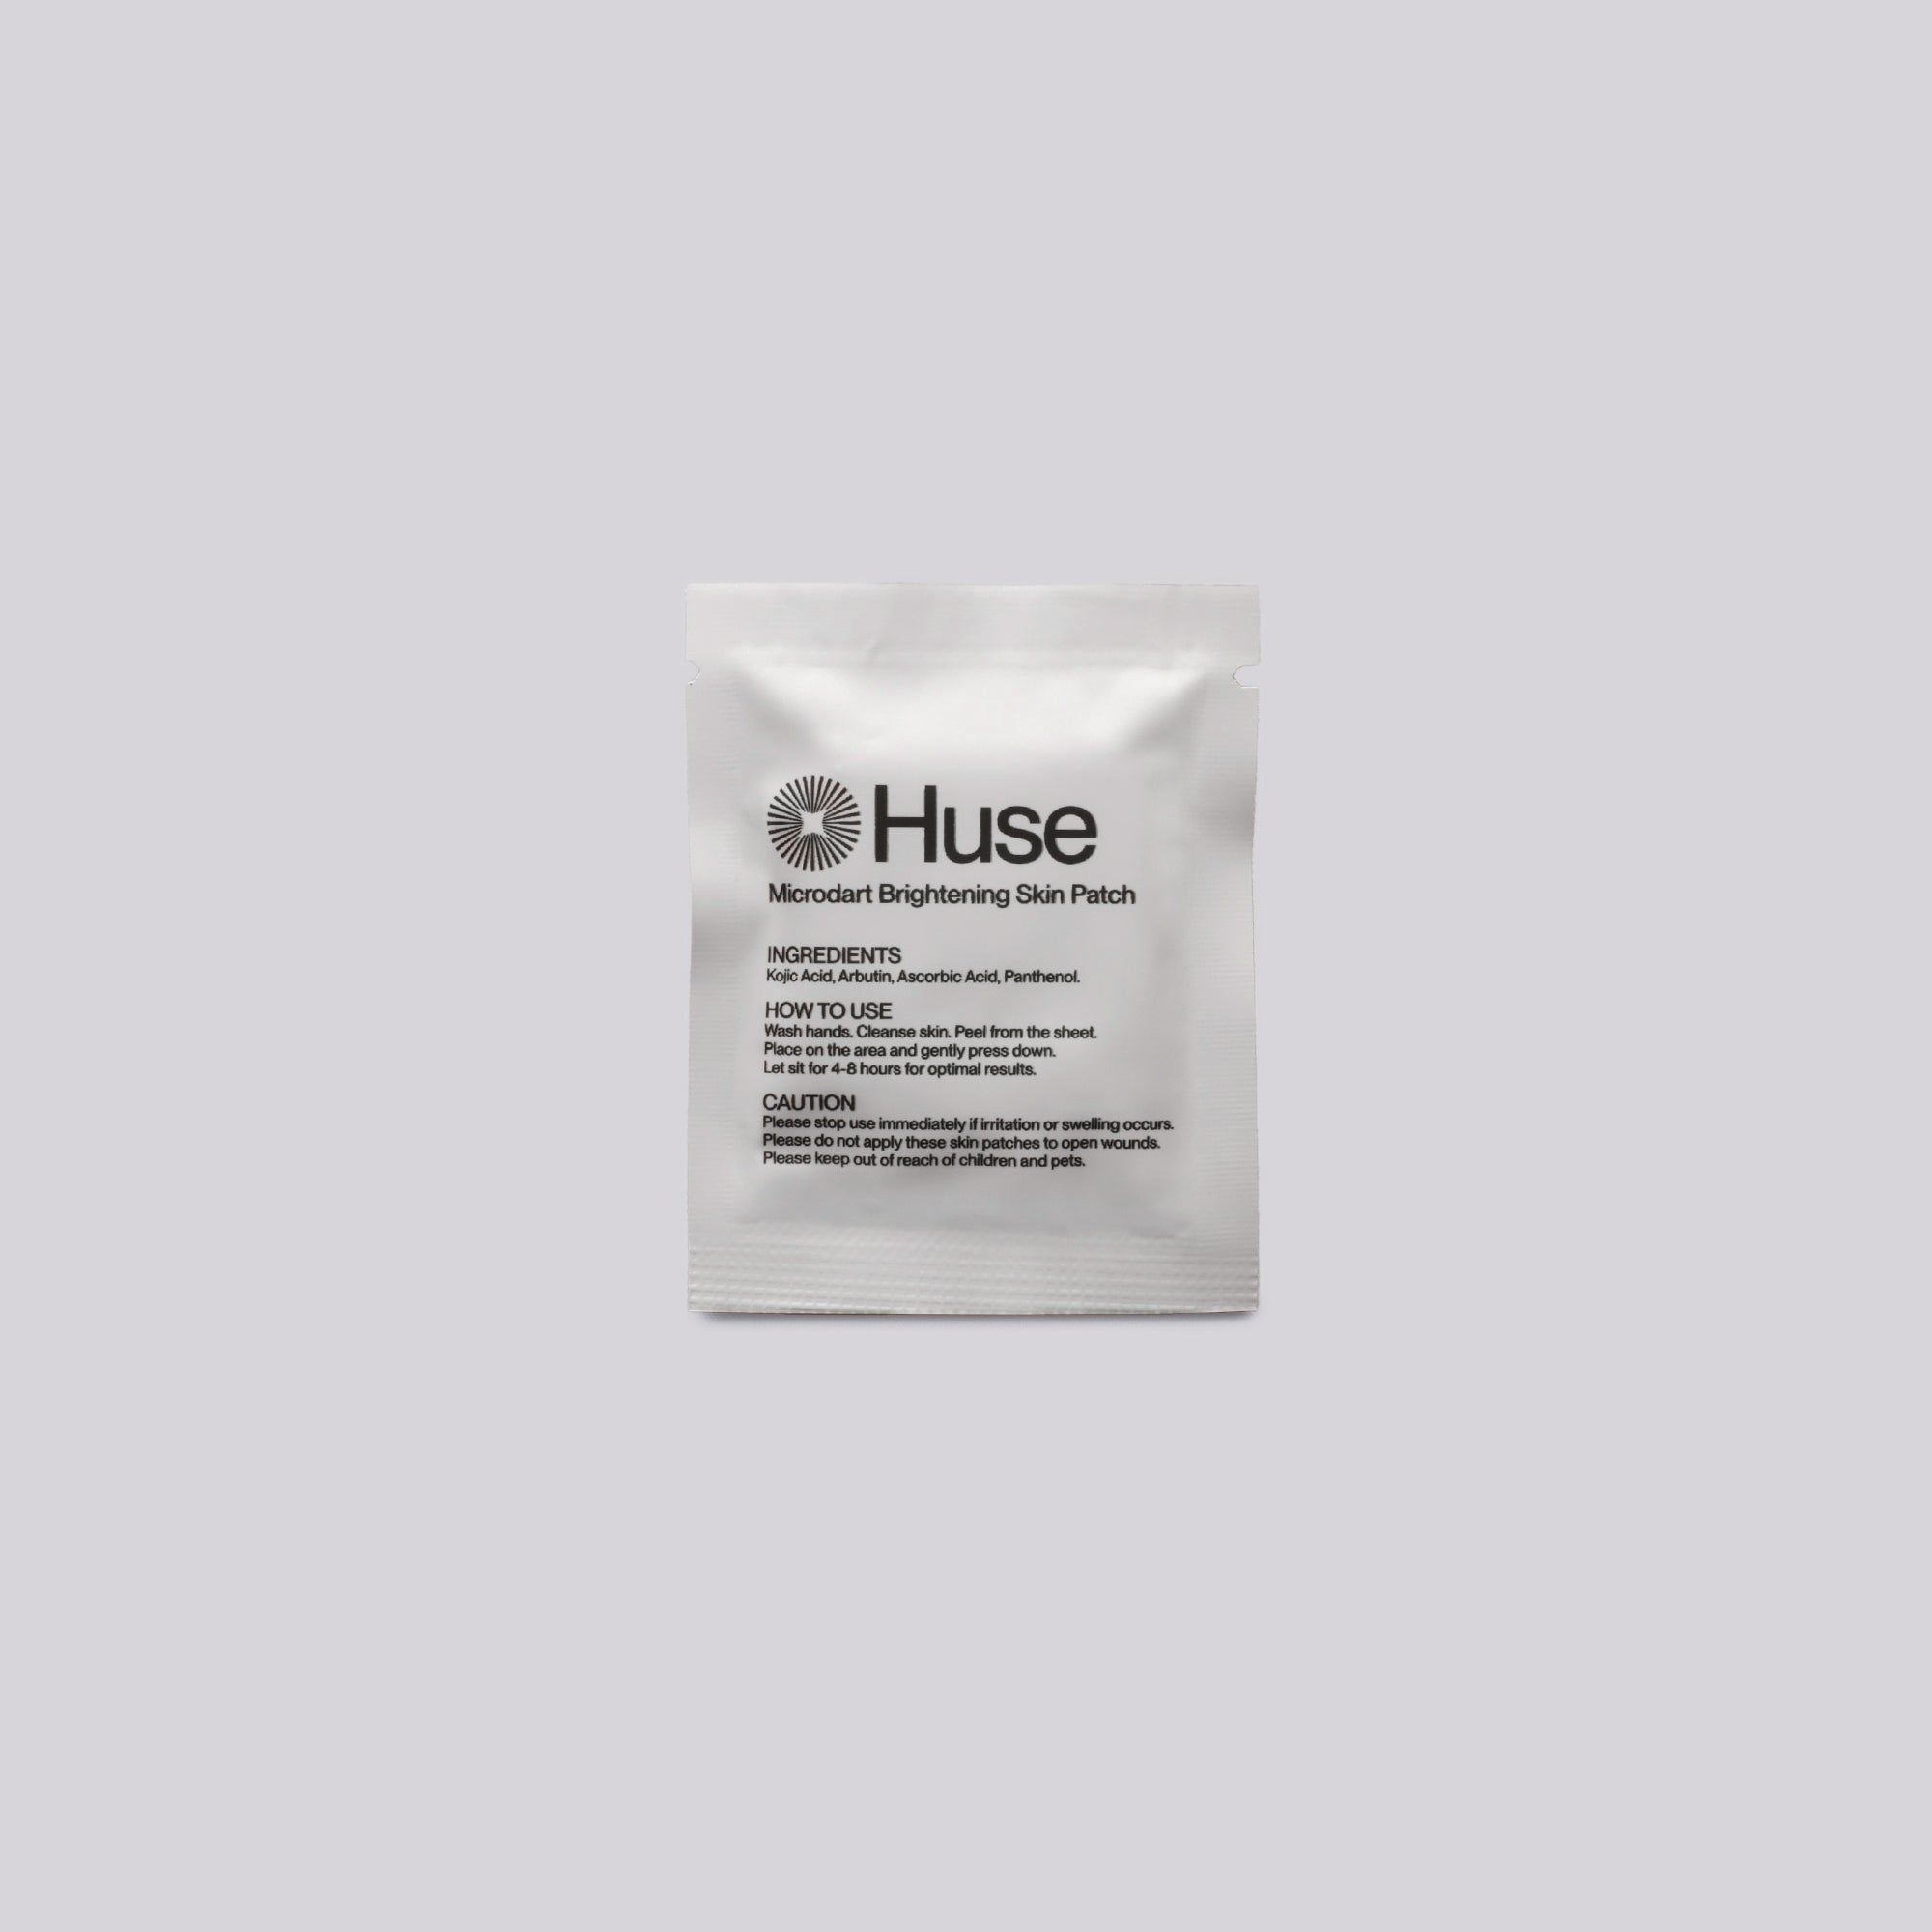 Huse microdart acne patch with powerful combination of kojic acid, arbutin, and ascorbic acid (Vitamin C). Best for acne scarring, hyperpigmentation, and balancing the skin’s complexion.